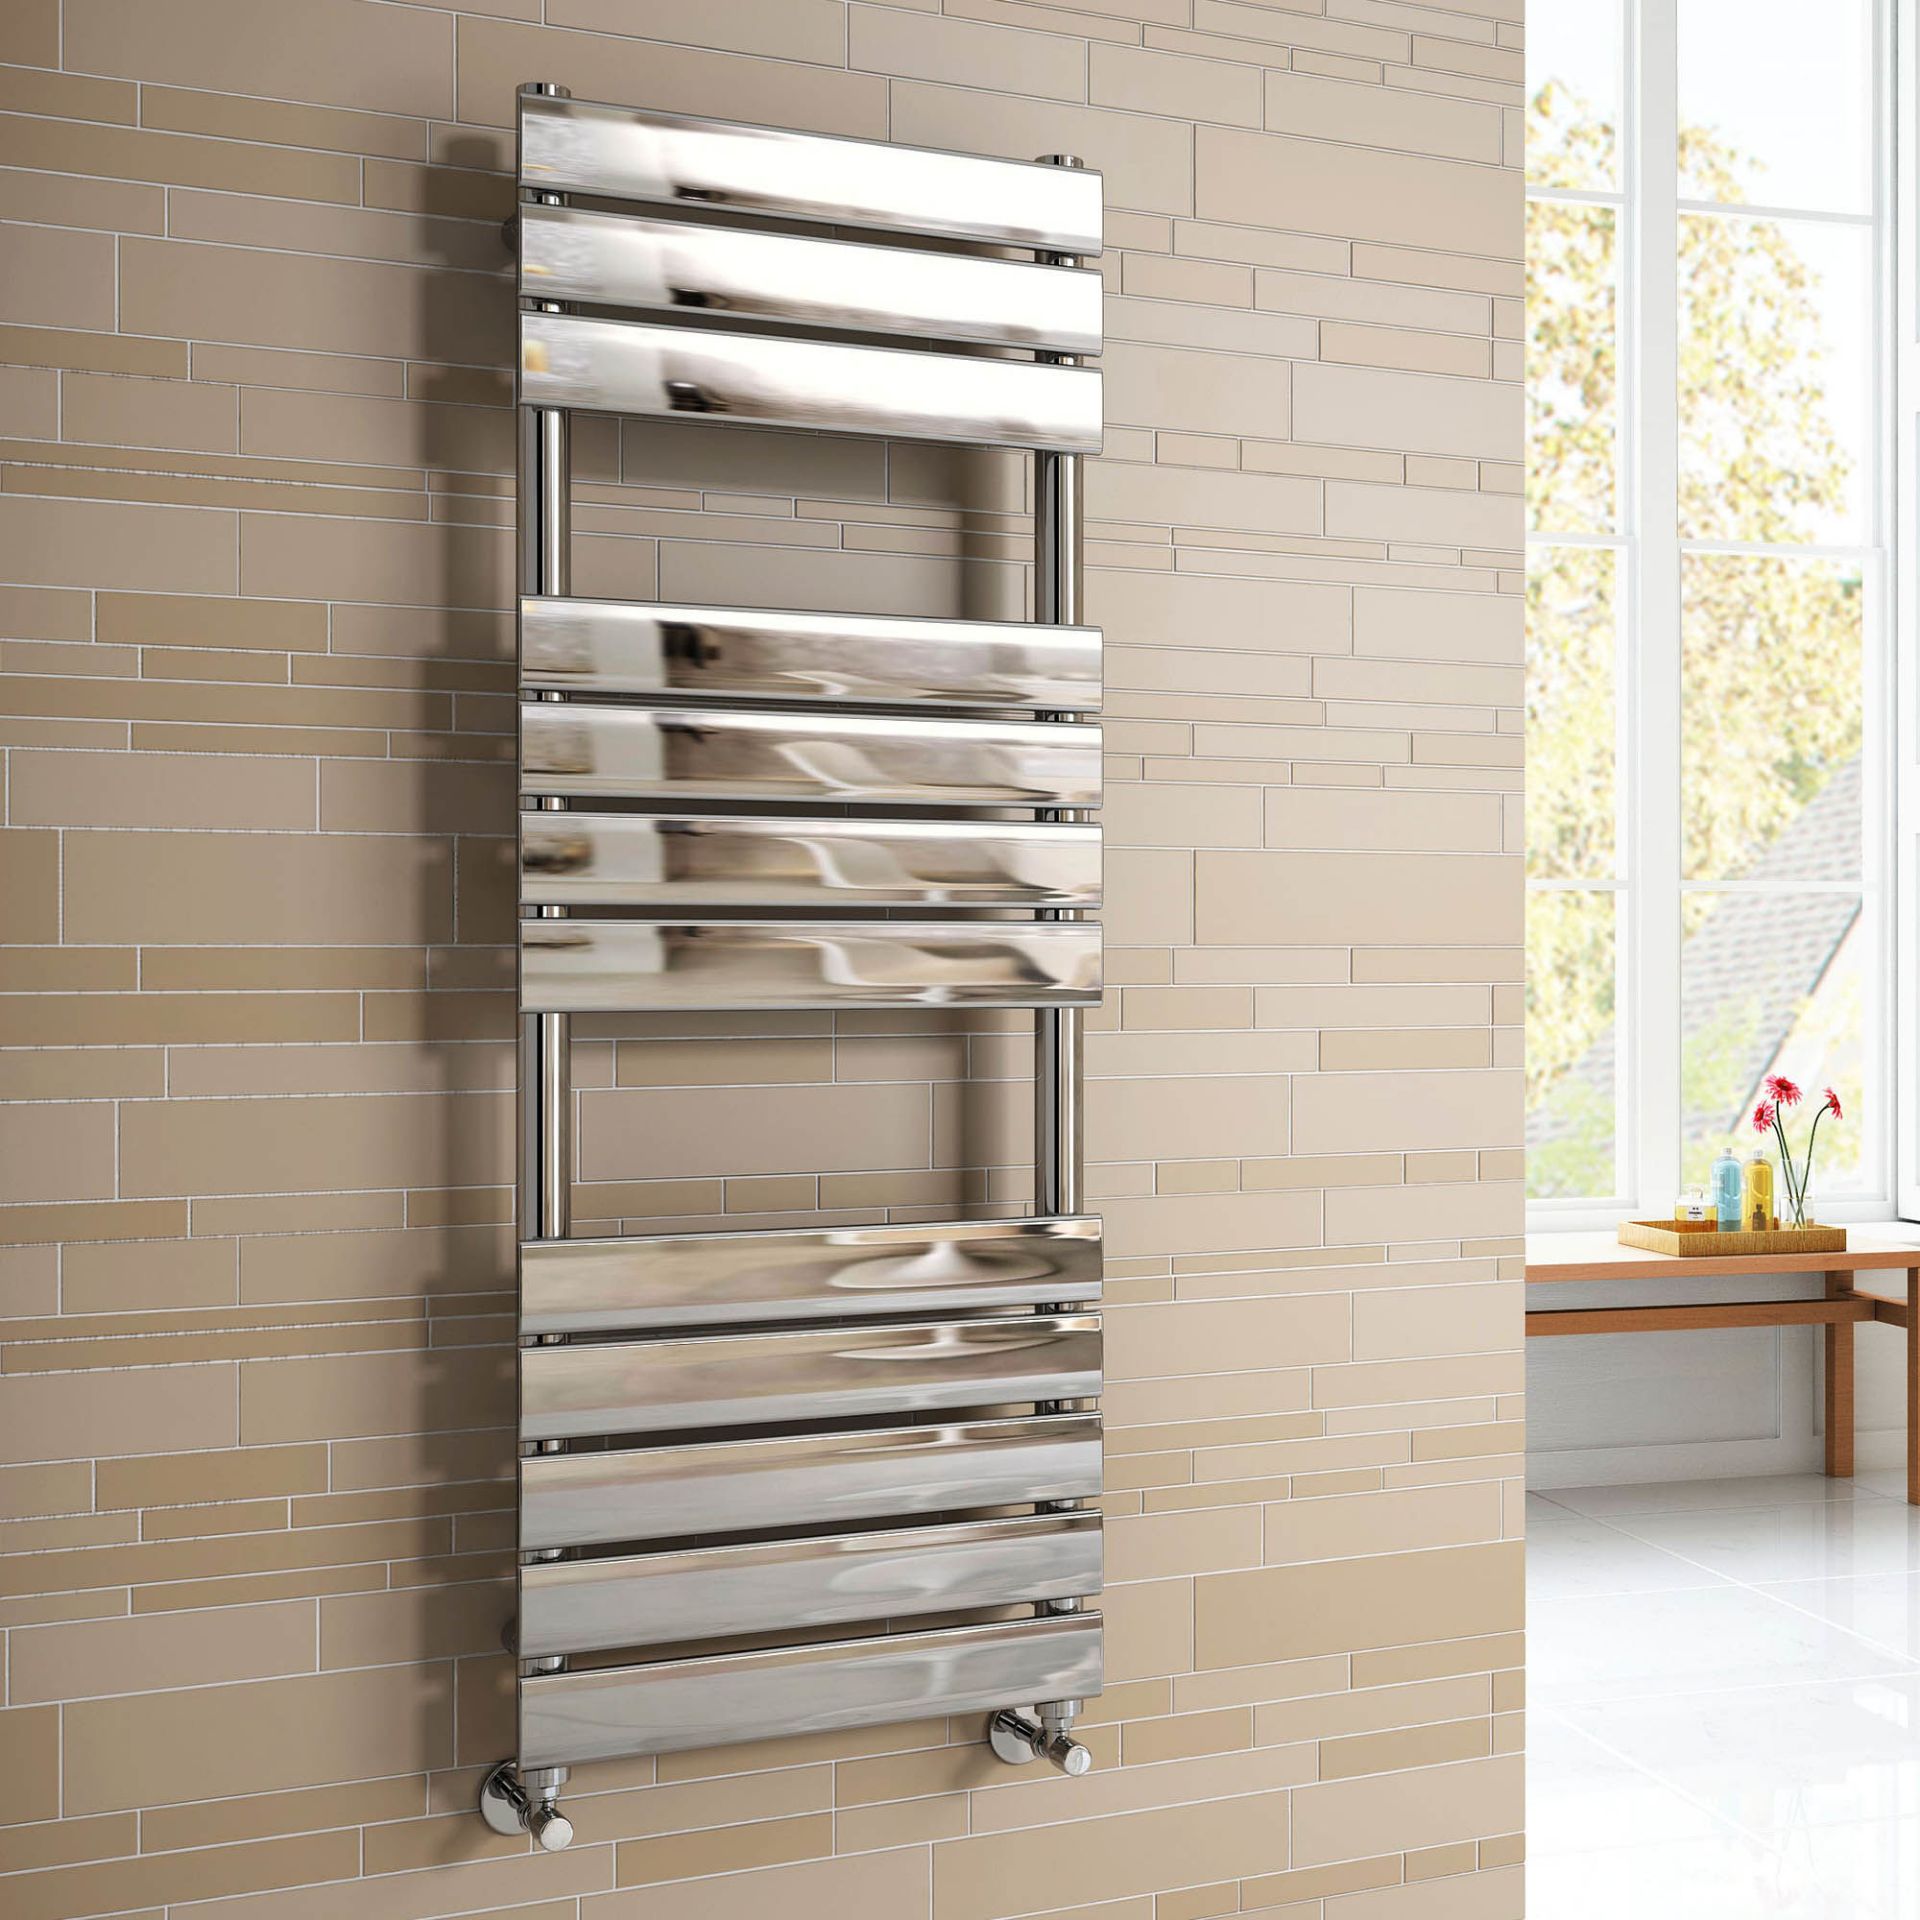 (EY213) 1200x450mm Chrome Flat Panel Ladder Towel Radiator. RRP £389.99. Made from low carbon